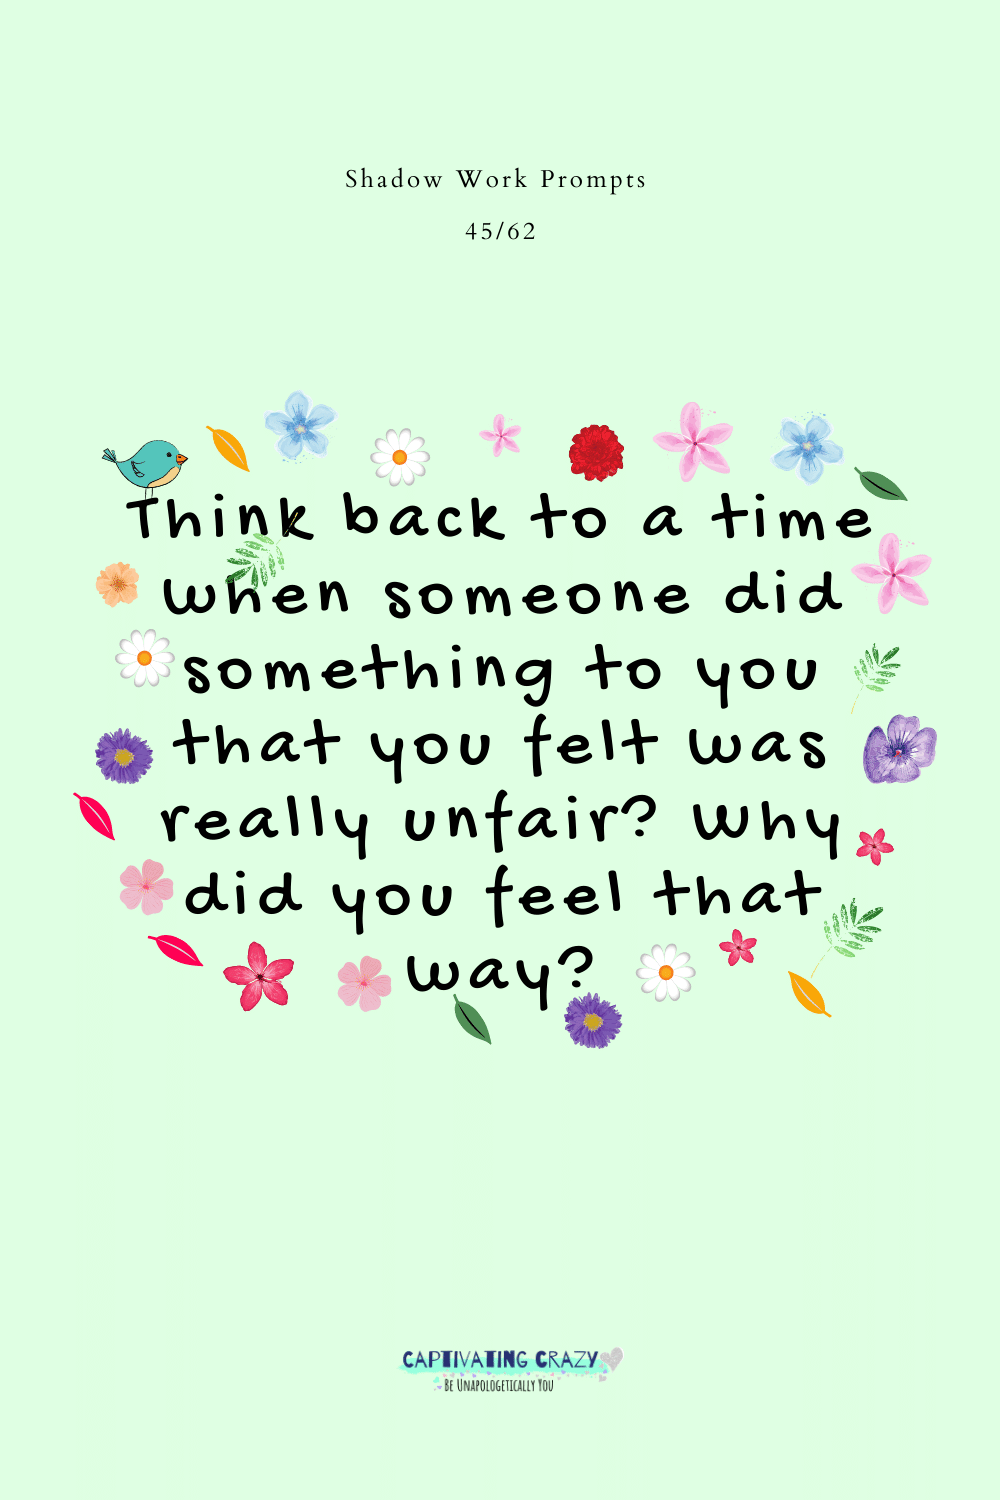 Think back to a time when someone did something to you that you felt was really unfair? Why did you feel that way?